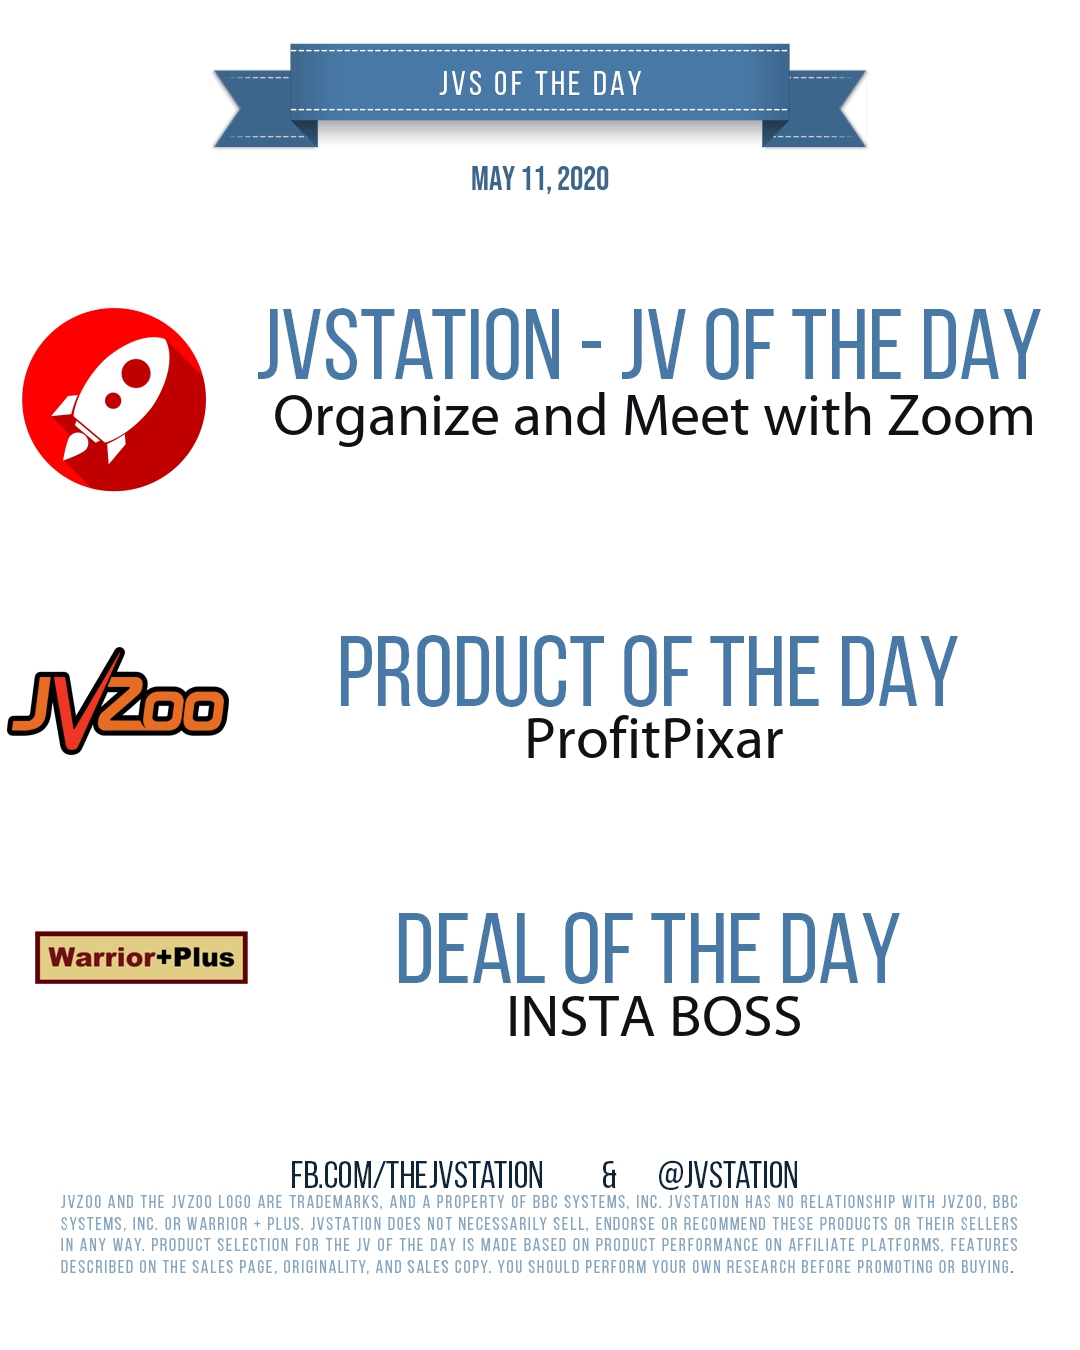 JVs of the day - May 11, 2020